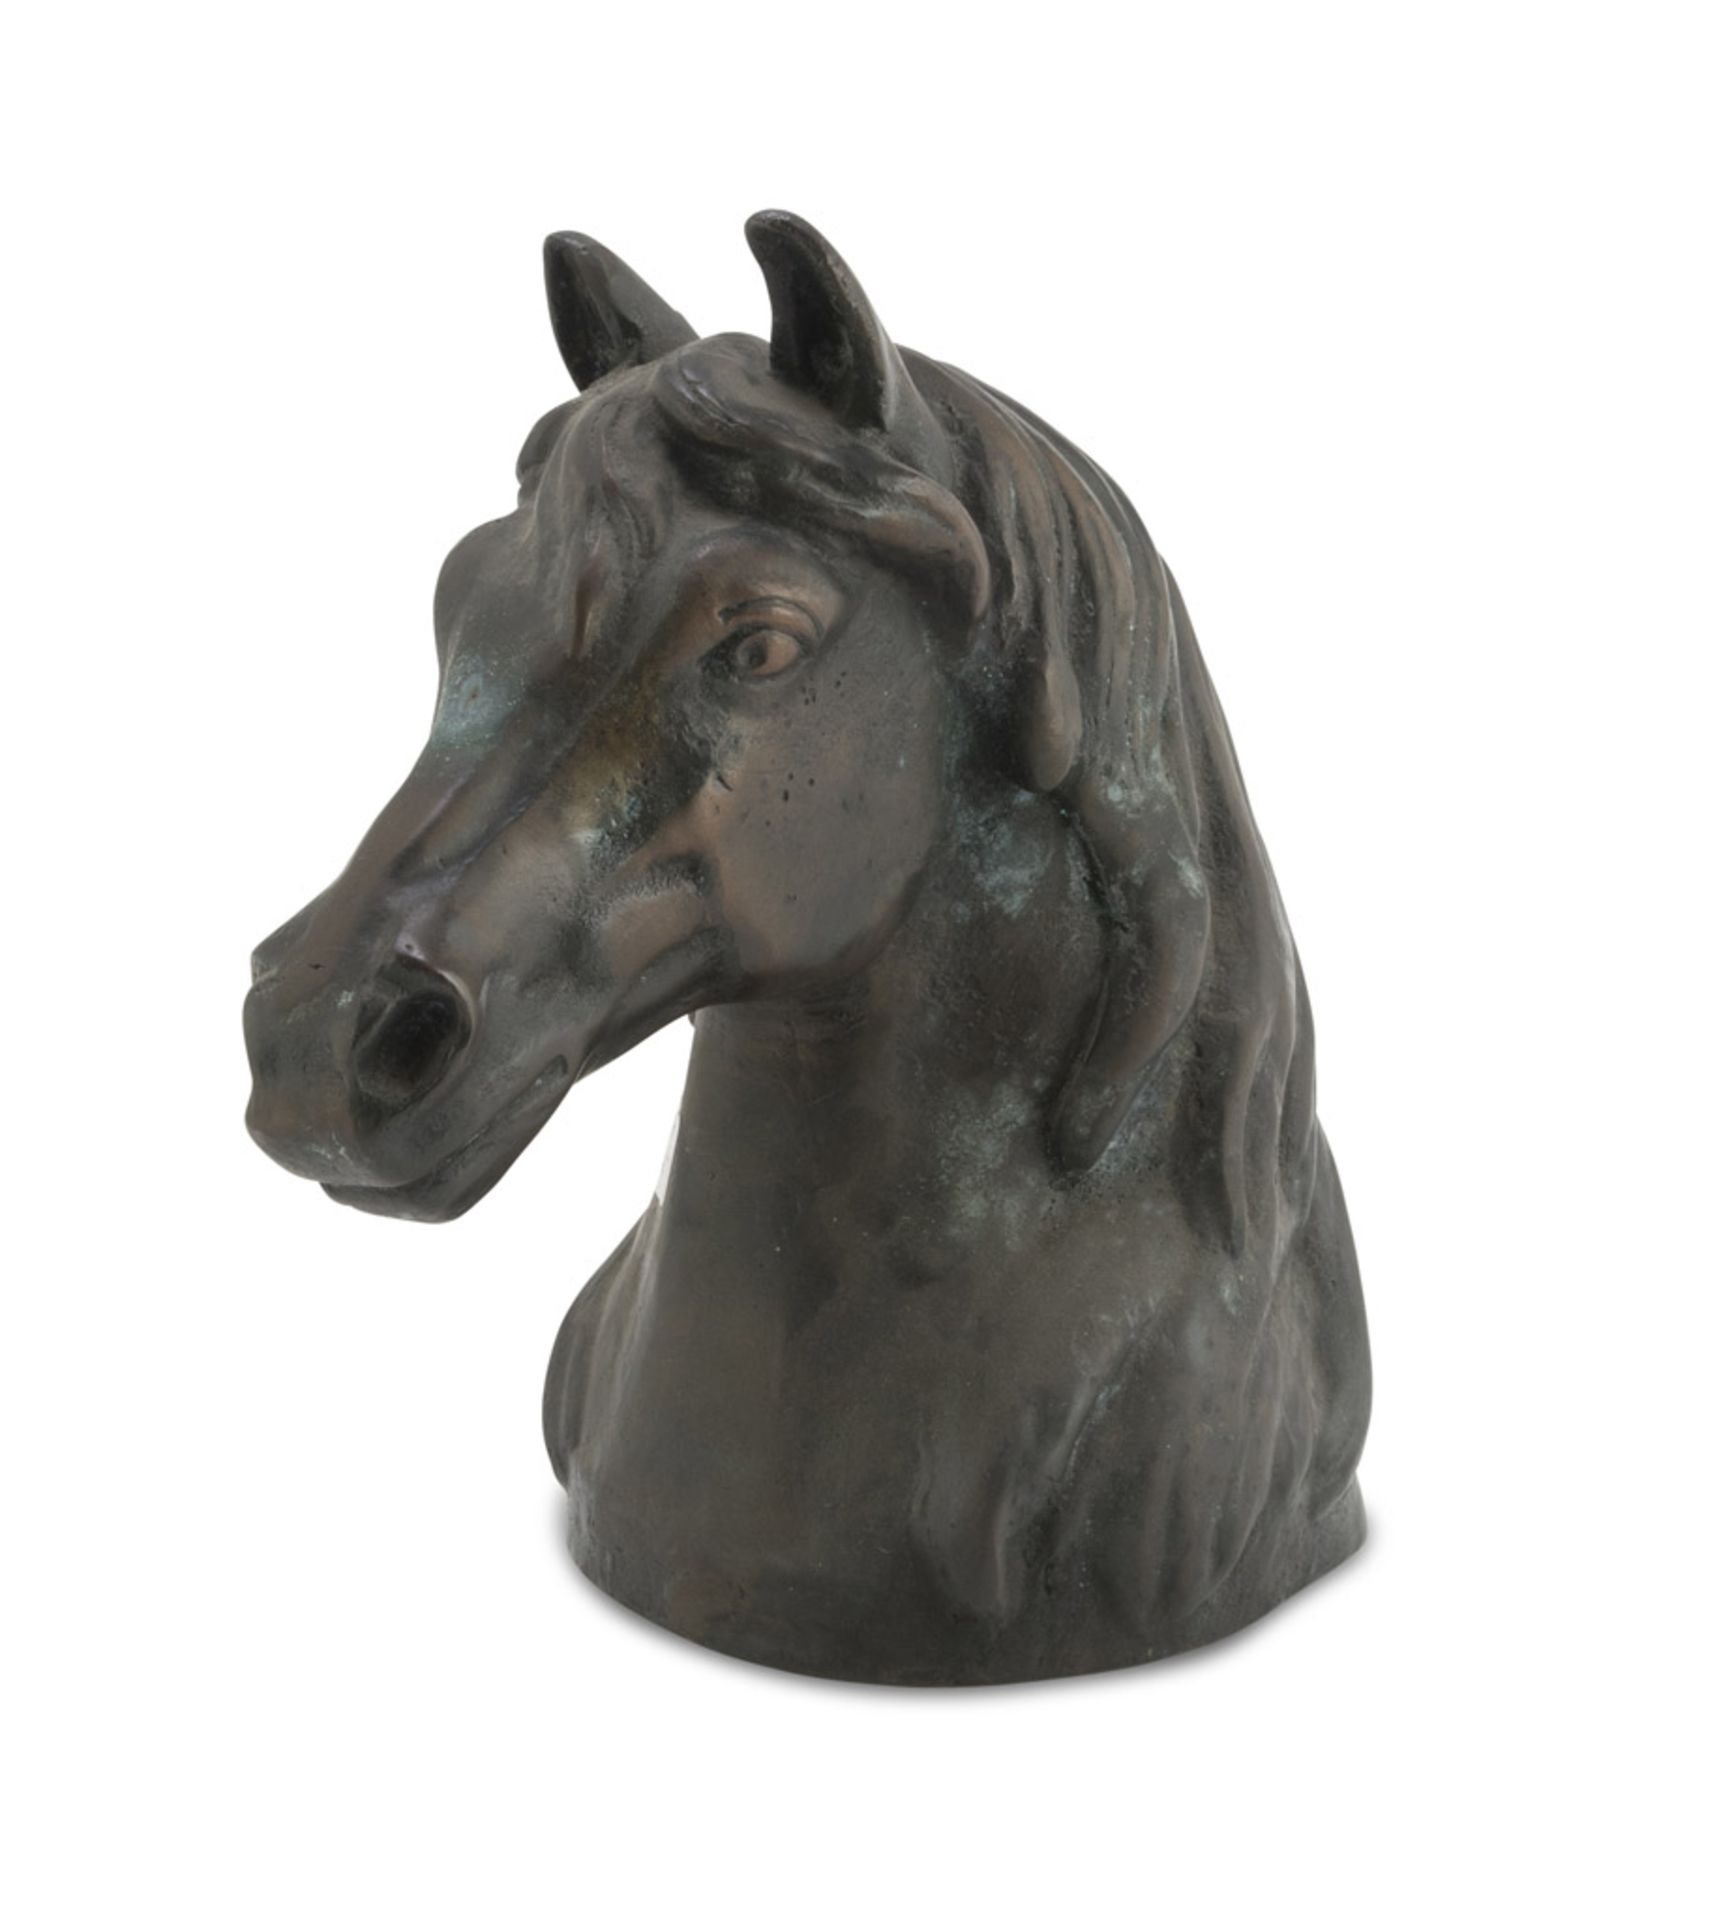 HEAD OF HORSE IN BRONZE, EARLY 20TH CENTURY with burnished patina. Measures cm. 26 x 15 x 22.